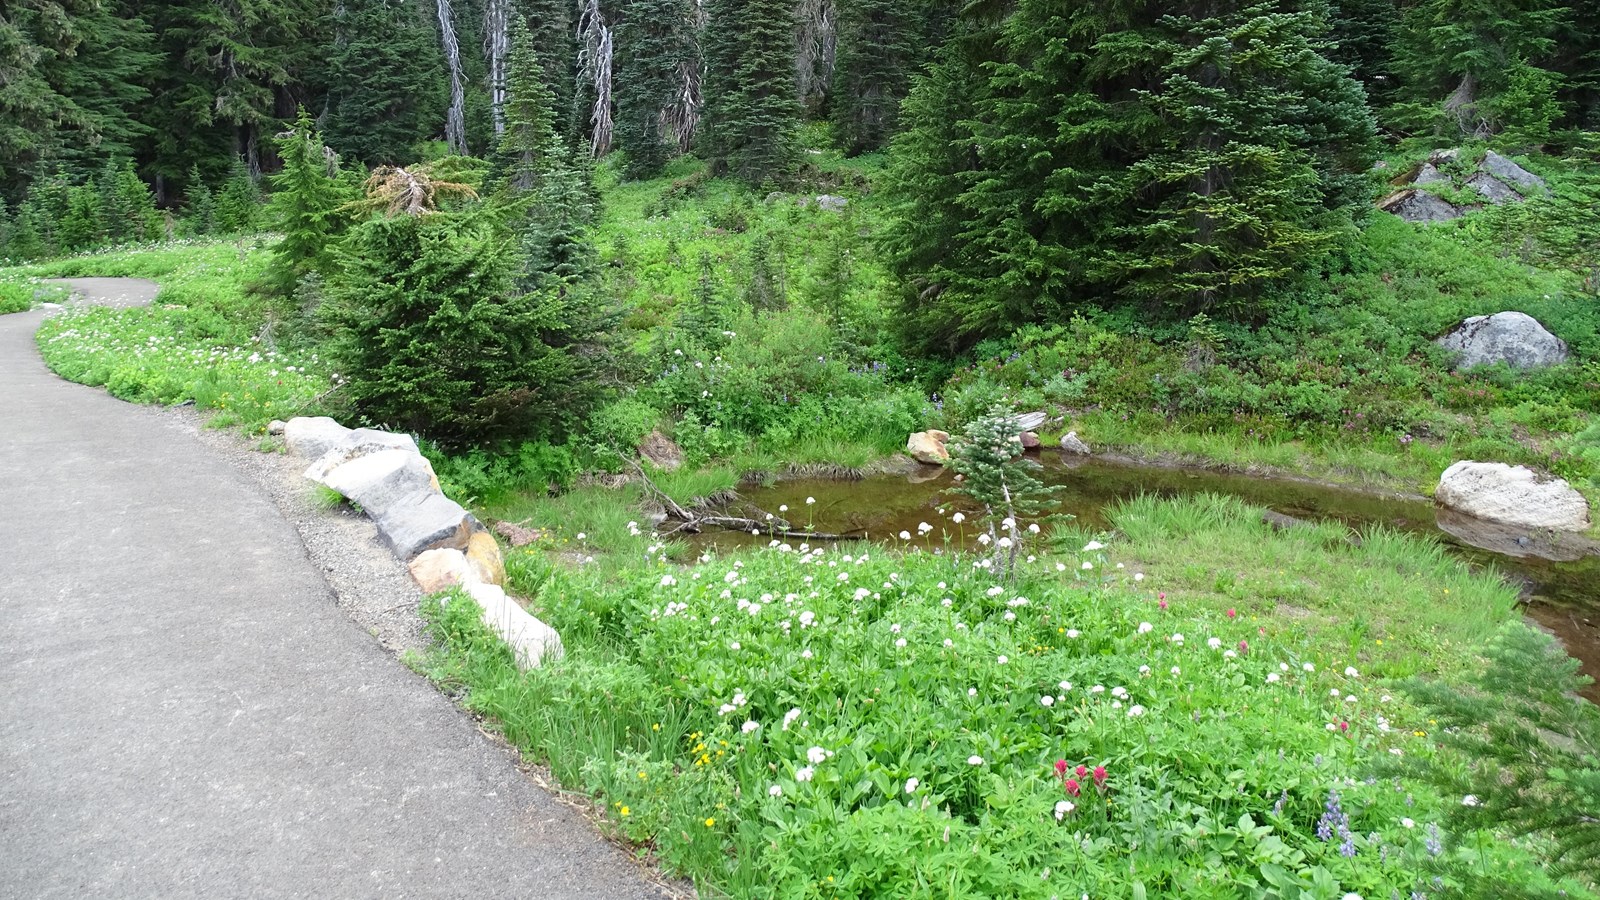 A paved trail with a small seasonal pool to the right.